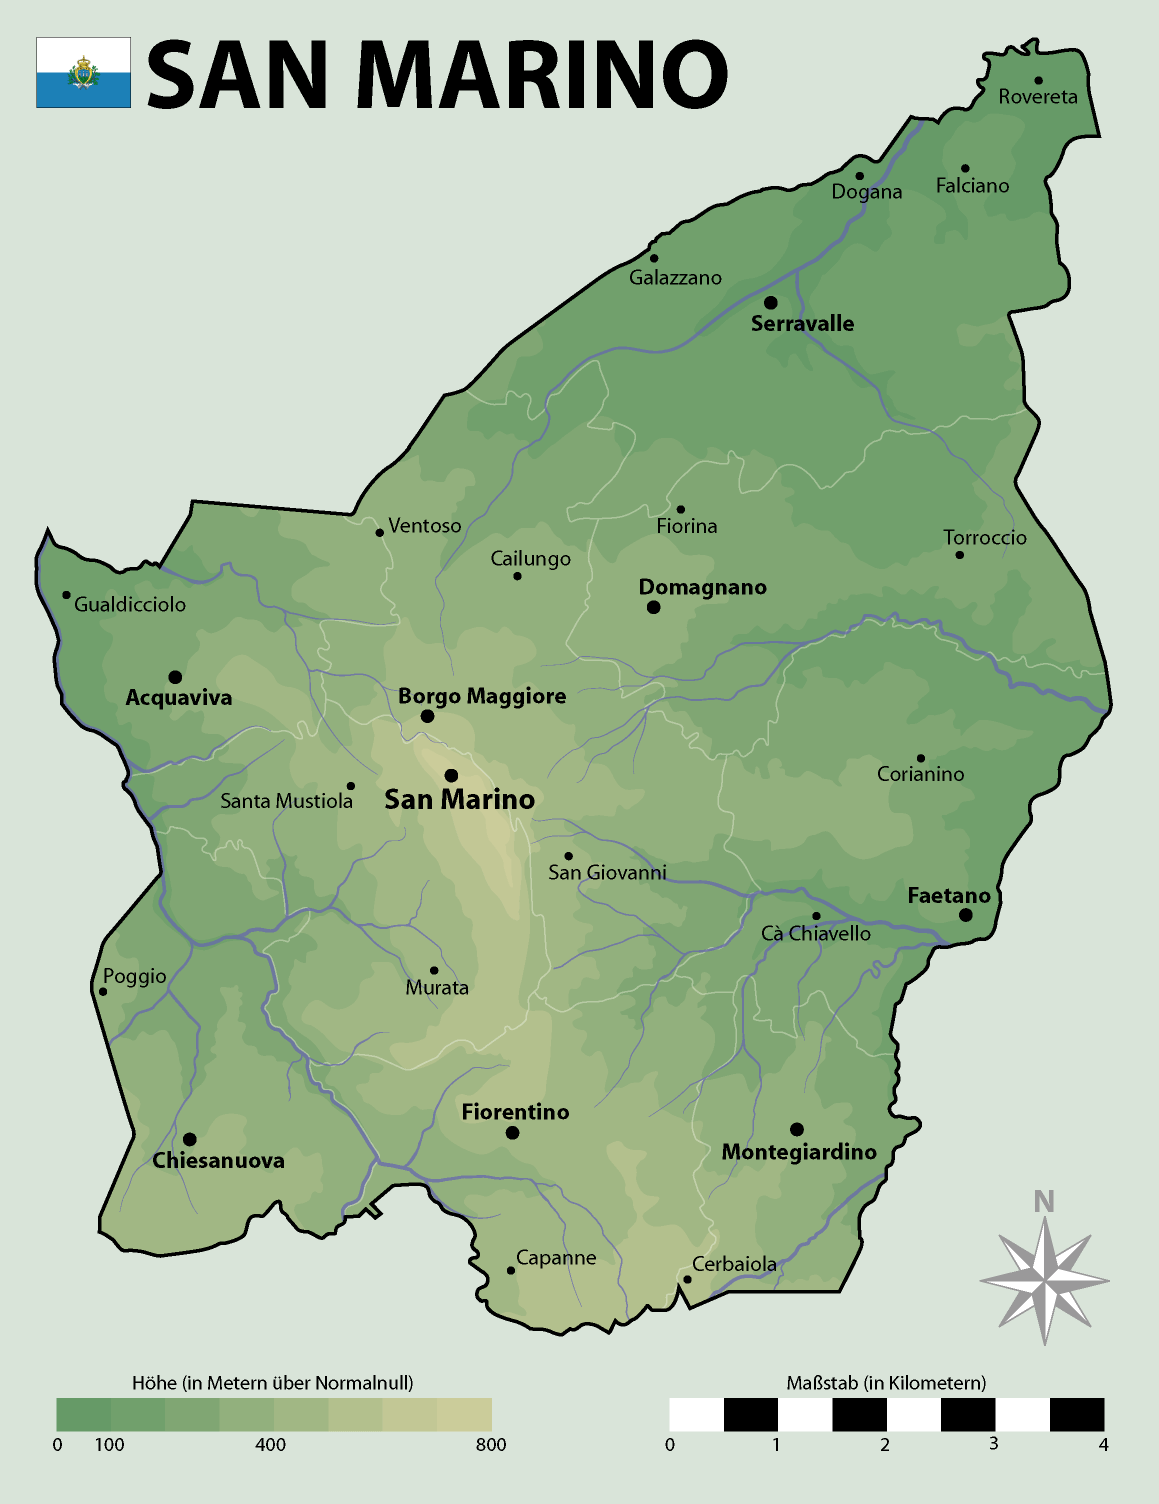 A detailed map of San marino with its main cities indicated